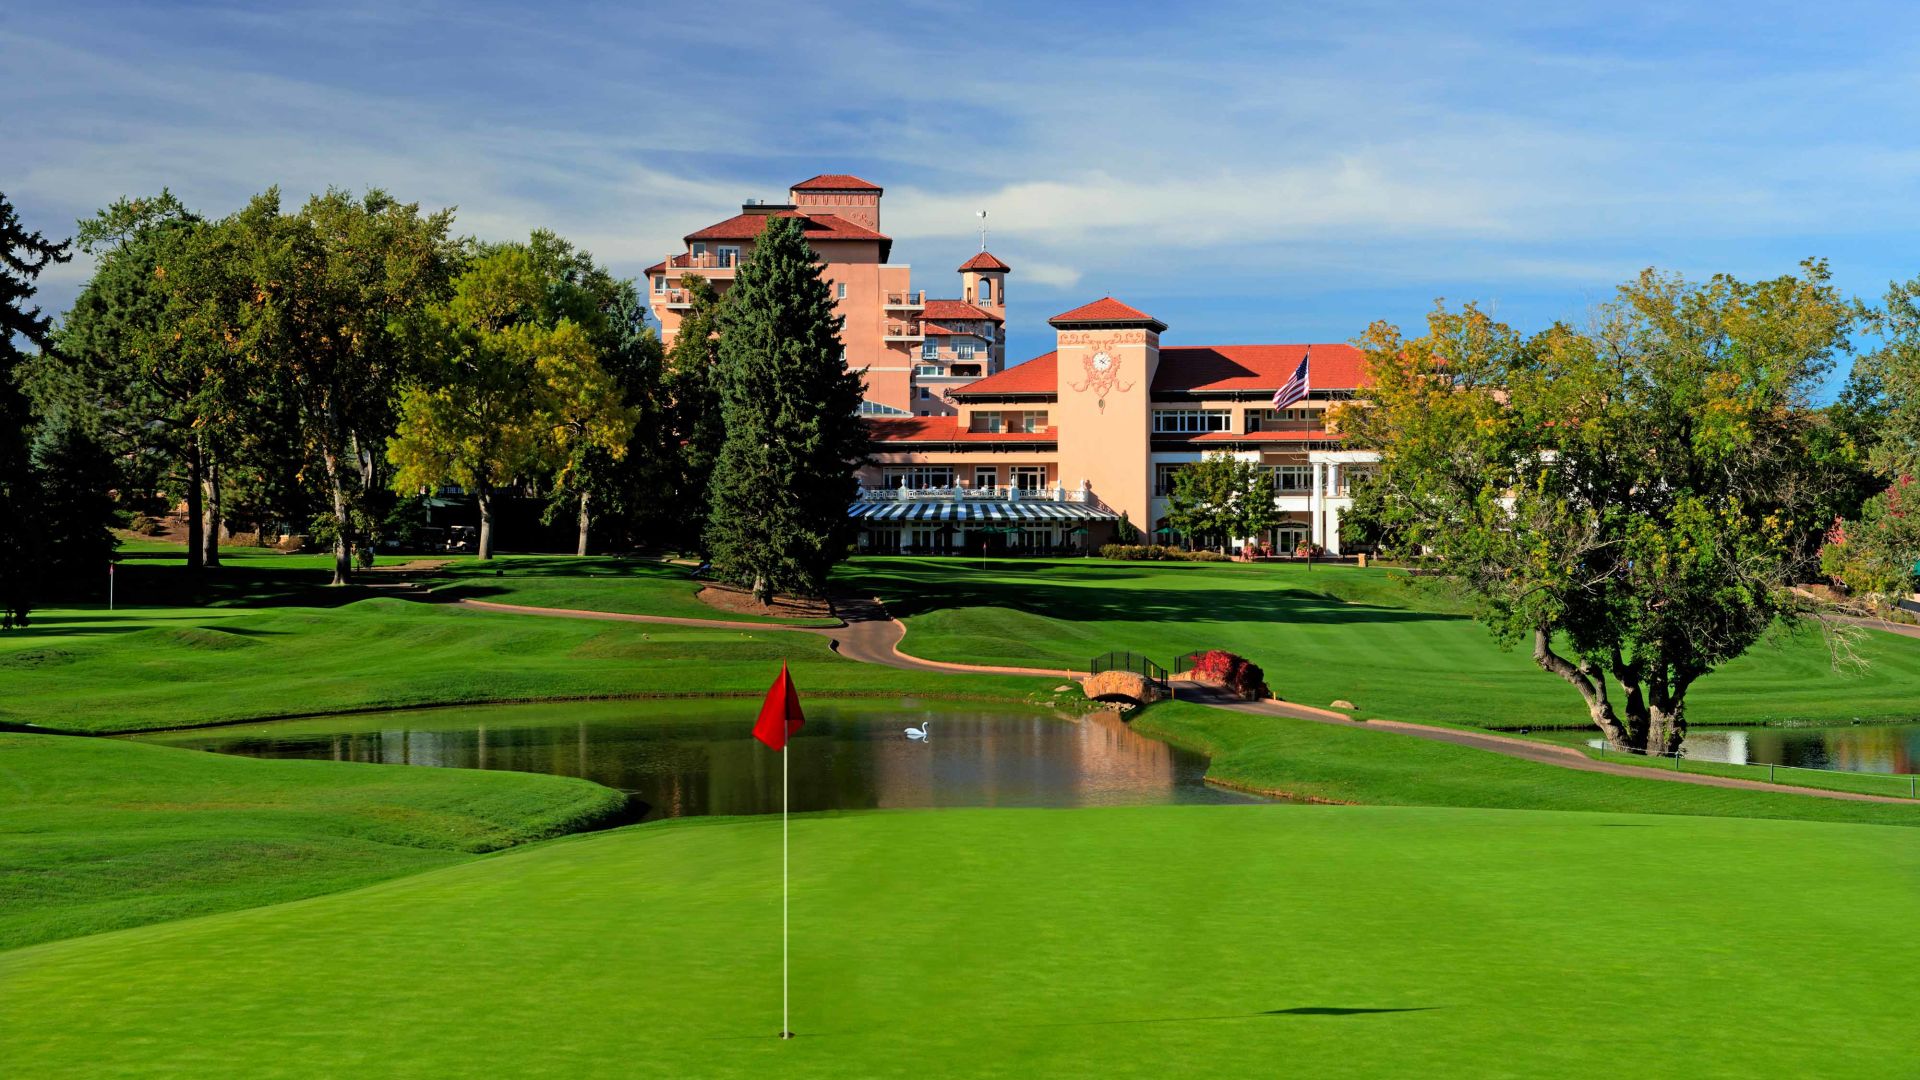 With a rich history and host to prestigious championships, it's a golfing oasis at The Broadmoor resort (source: The Broadmoor).